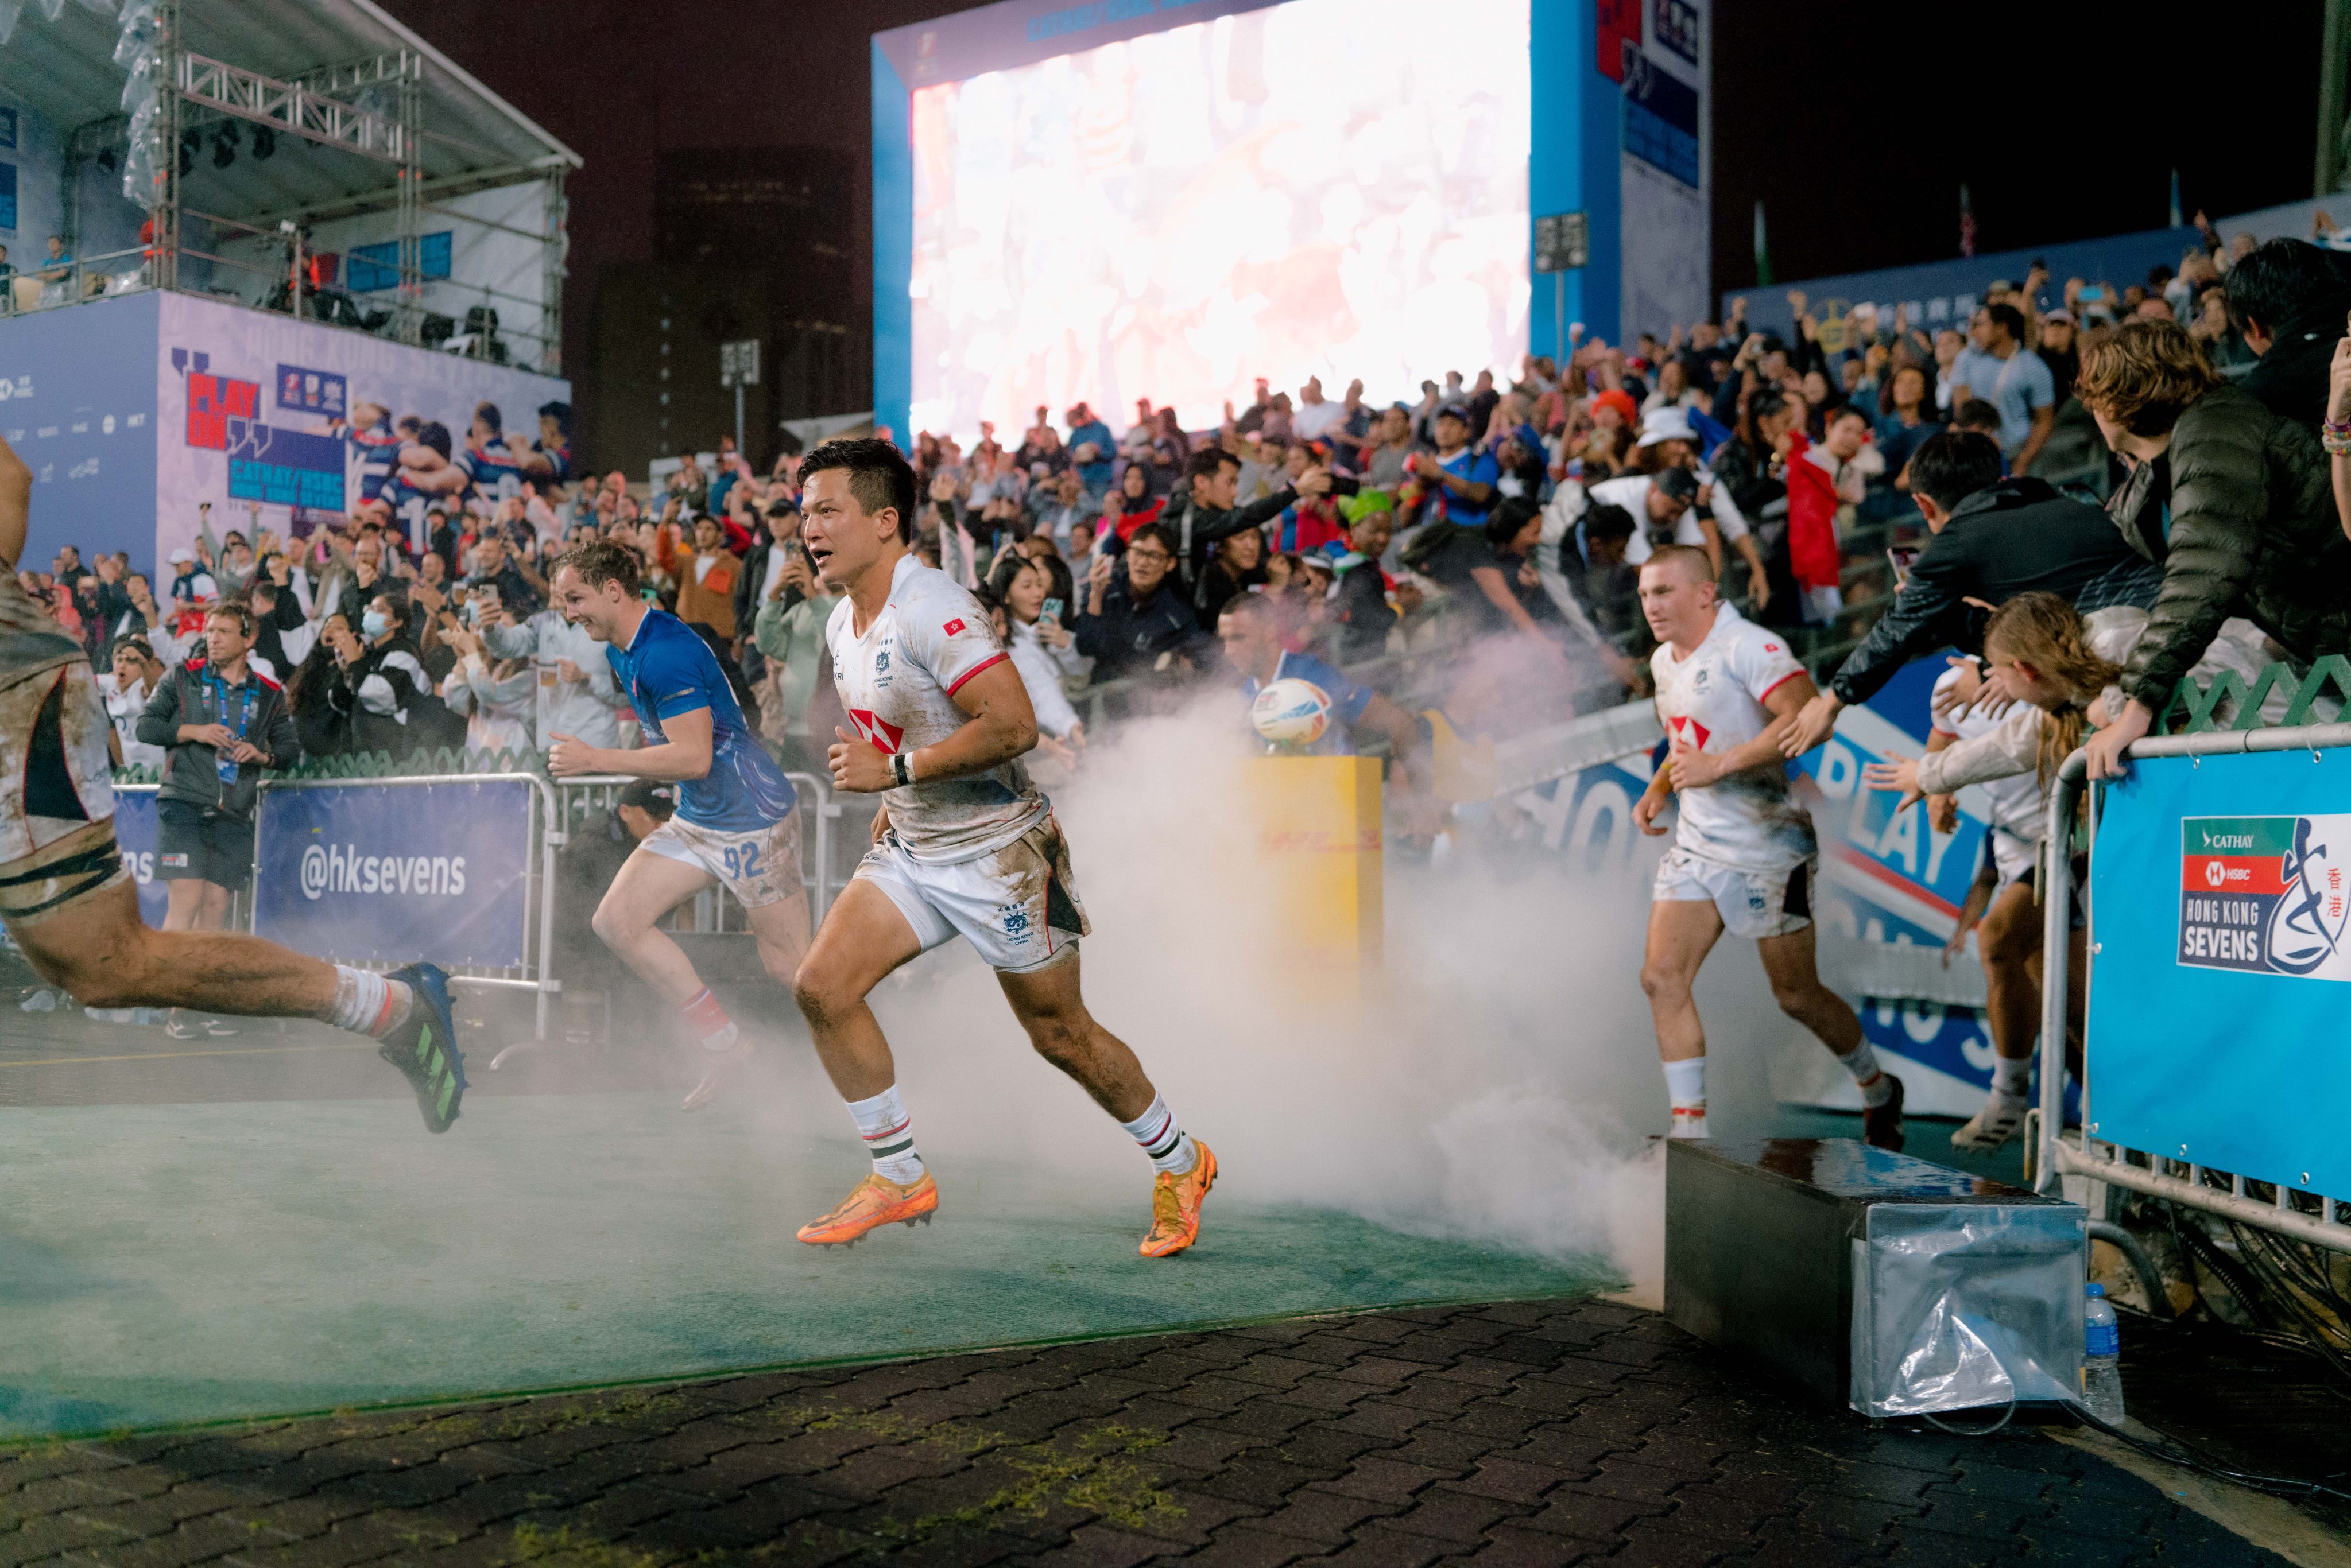 The Hong Kong team runs out during a game at the Sevens in April. Photo: World Rugby